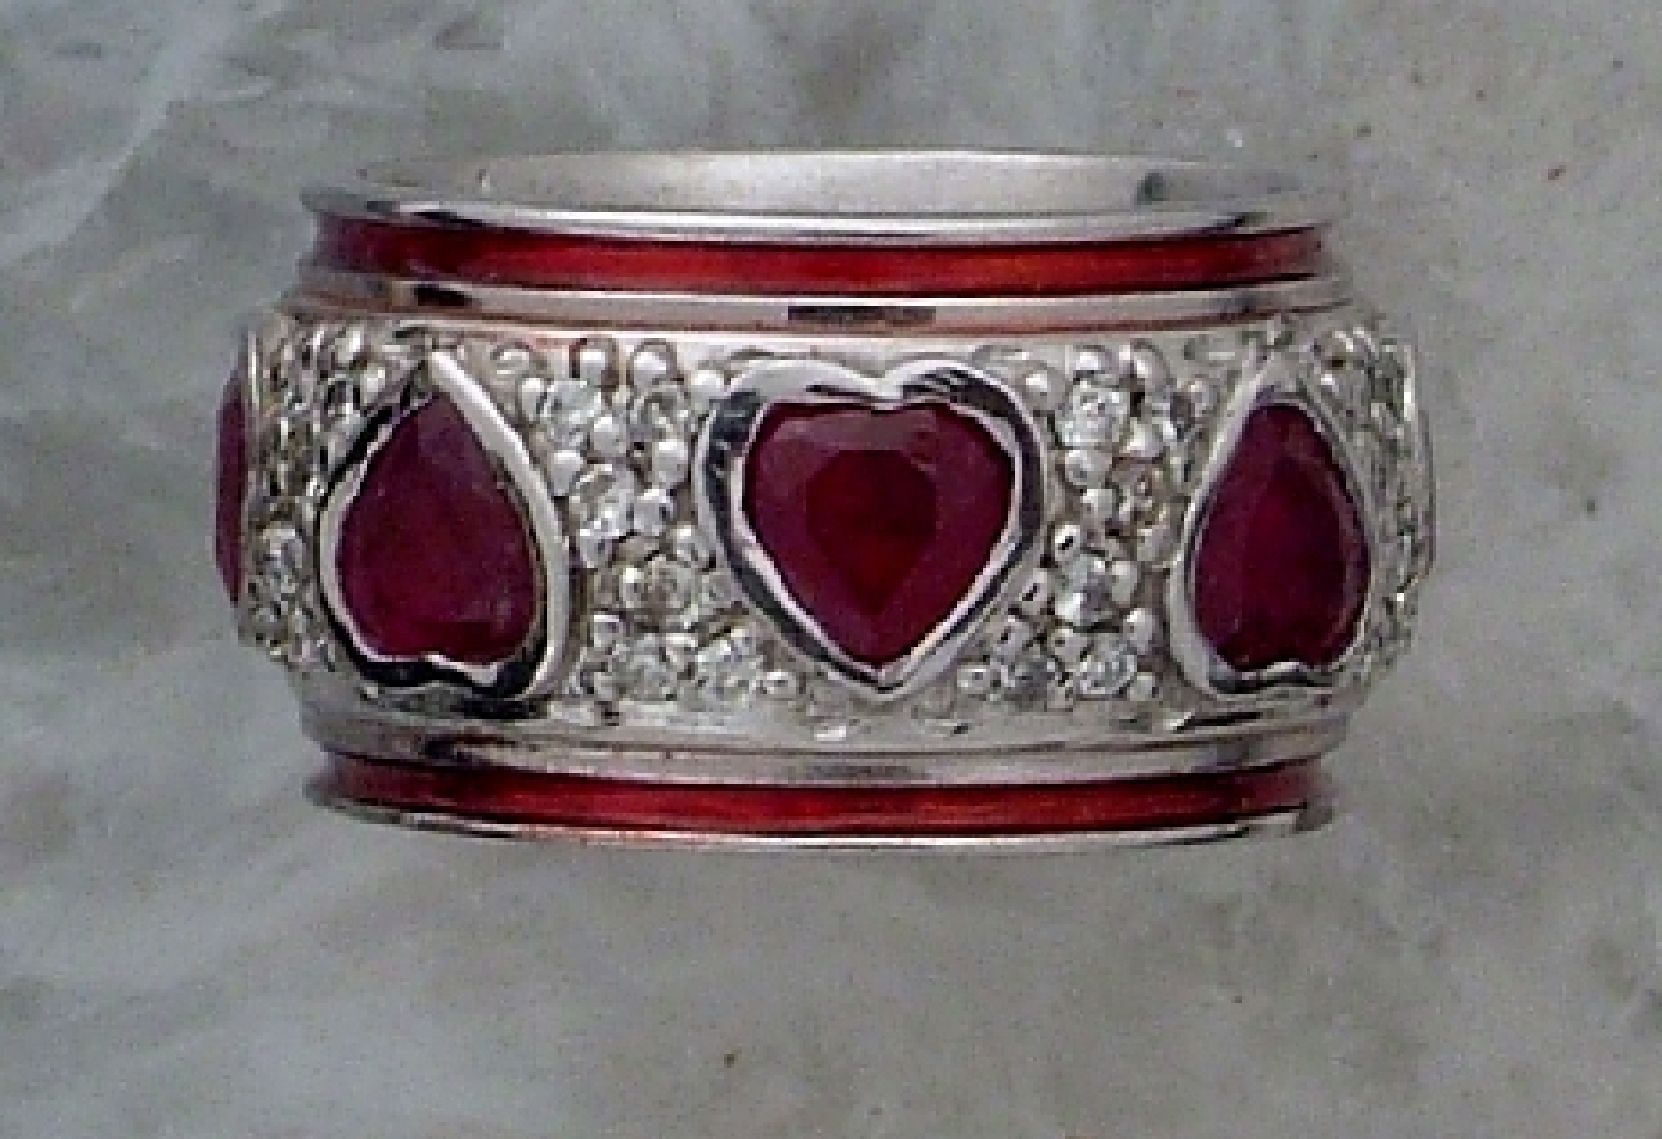 14K white gold band with ruby hearts and enamel highlights.